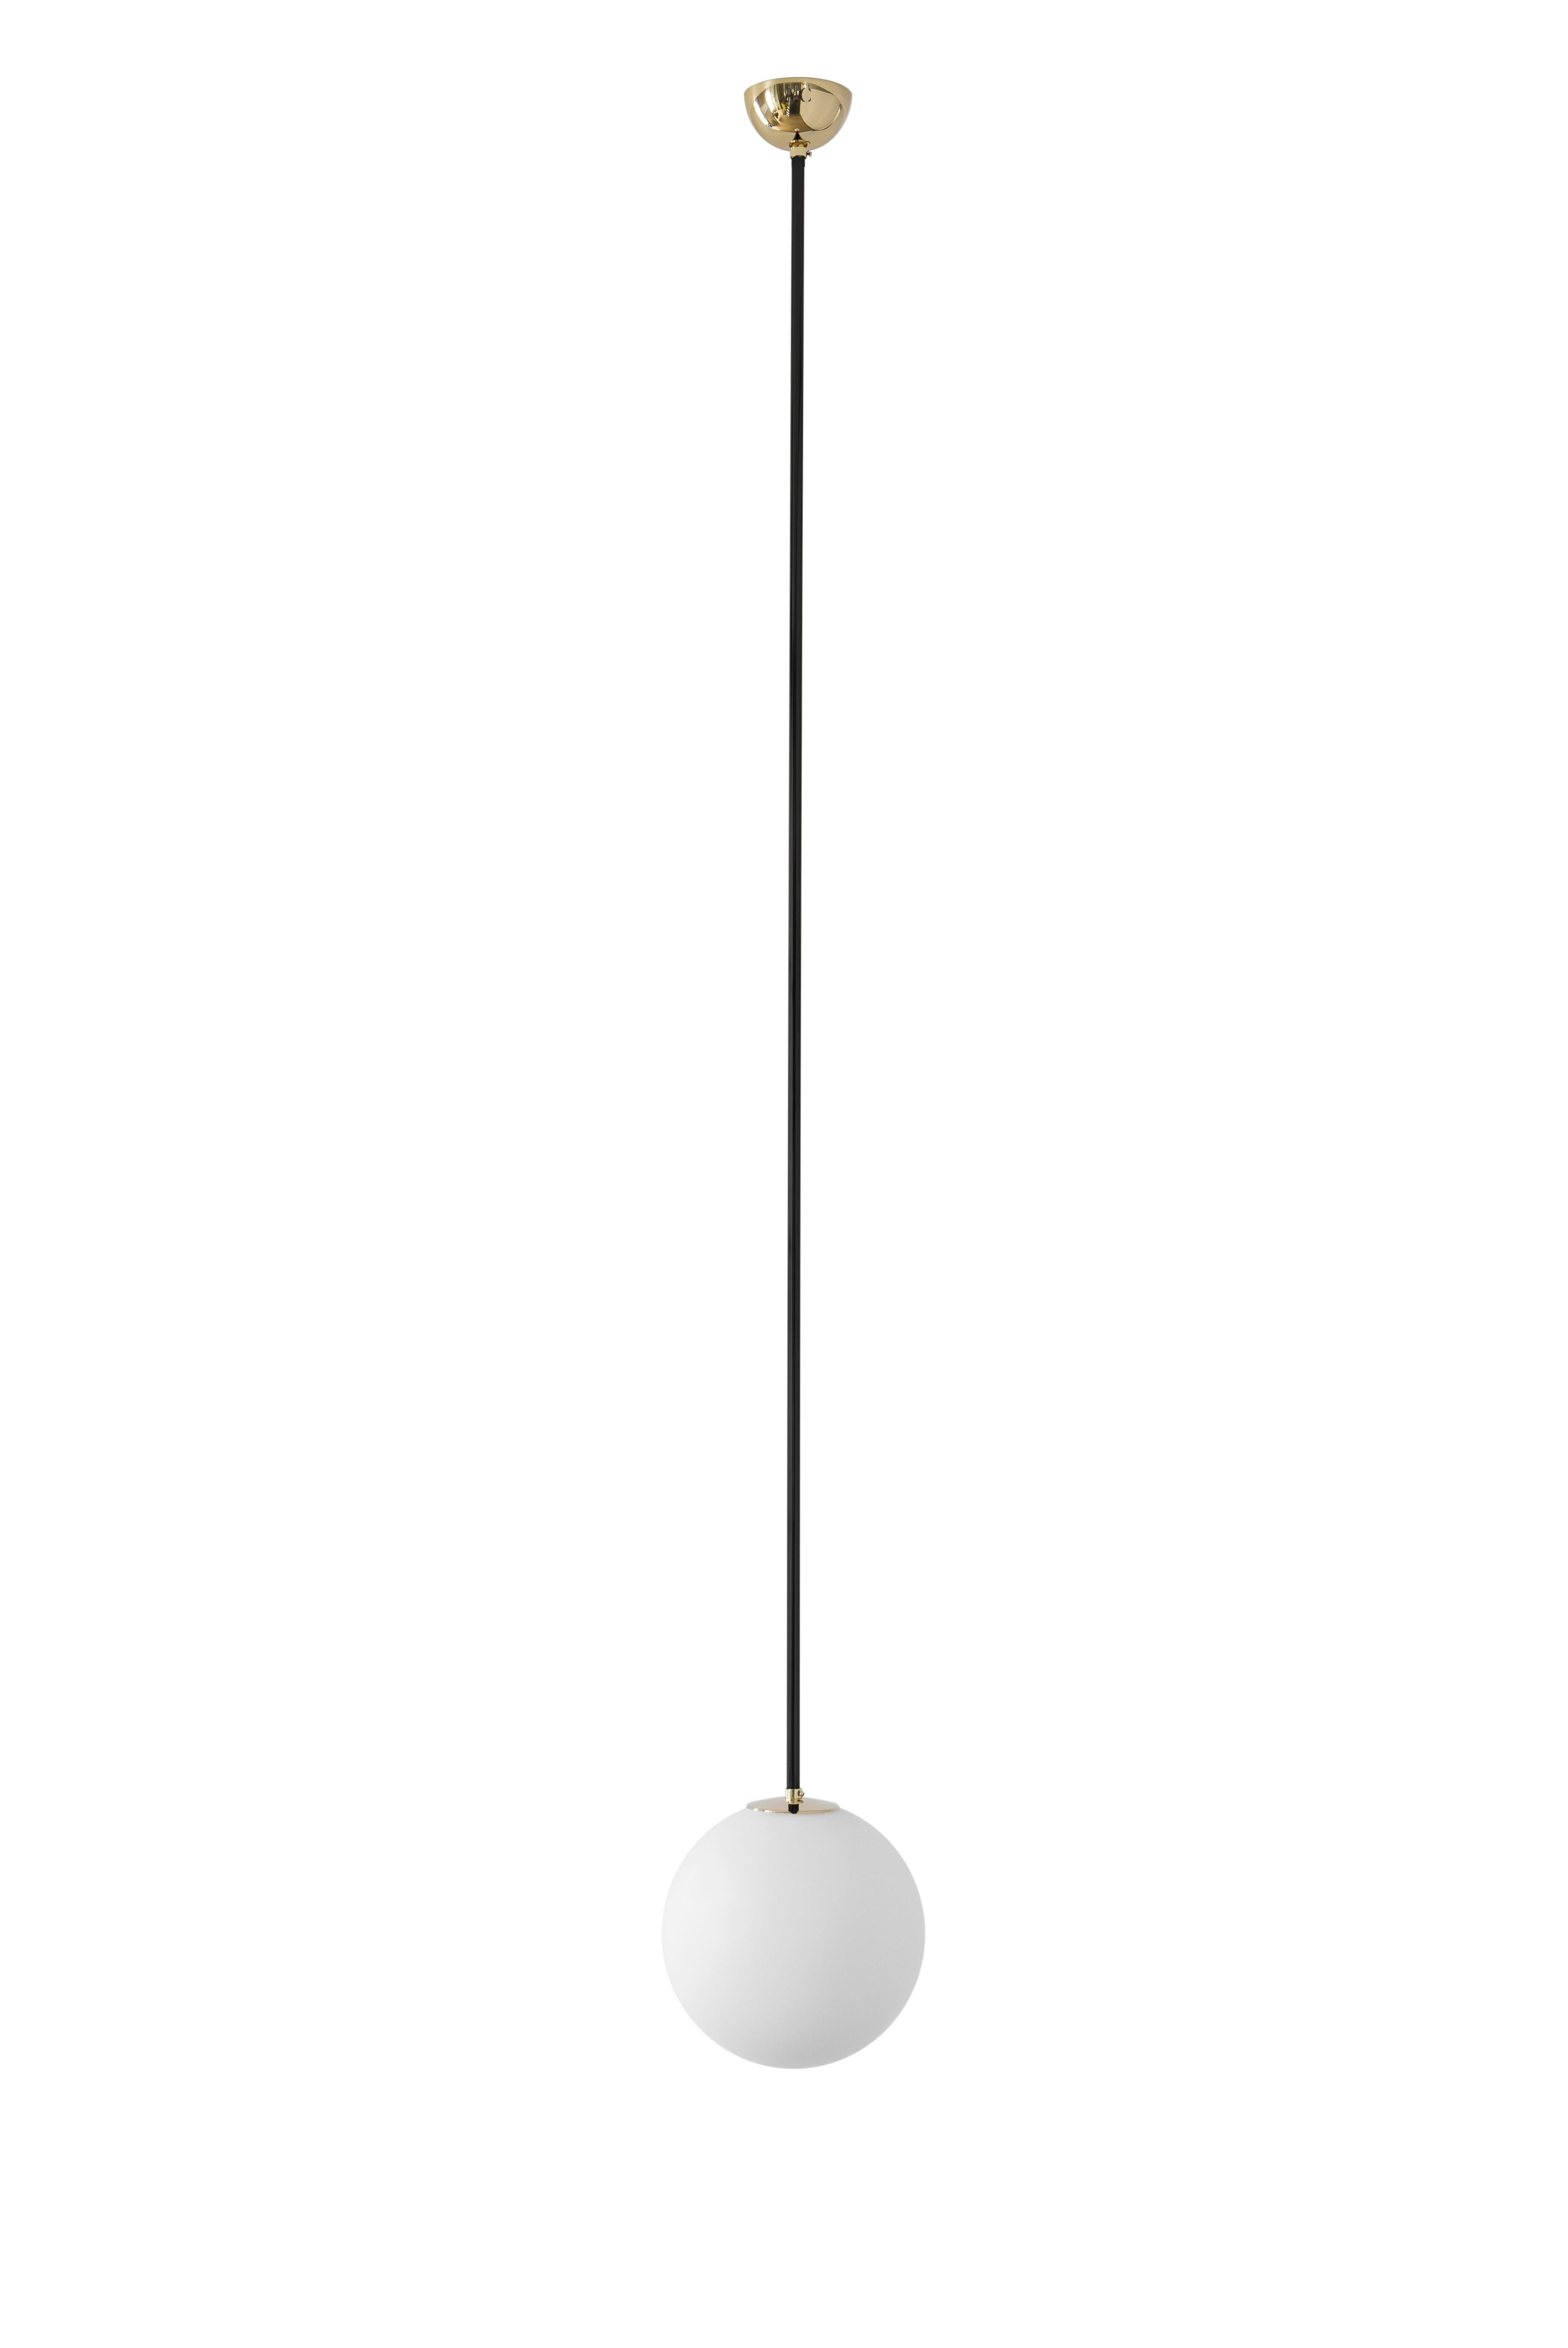 Pendant 06 by Magic Circus Editions.
Dimensions: D 25 x W 25 x H 90 cm, also available in H 110, 130, 150, 175, 190 cm.
Materials: brass, mouth blown glass.

All our lamps can be wired according to each country. If sold to the USA it will be